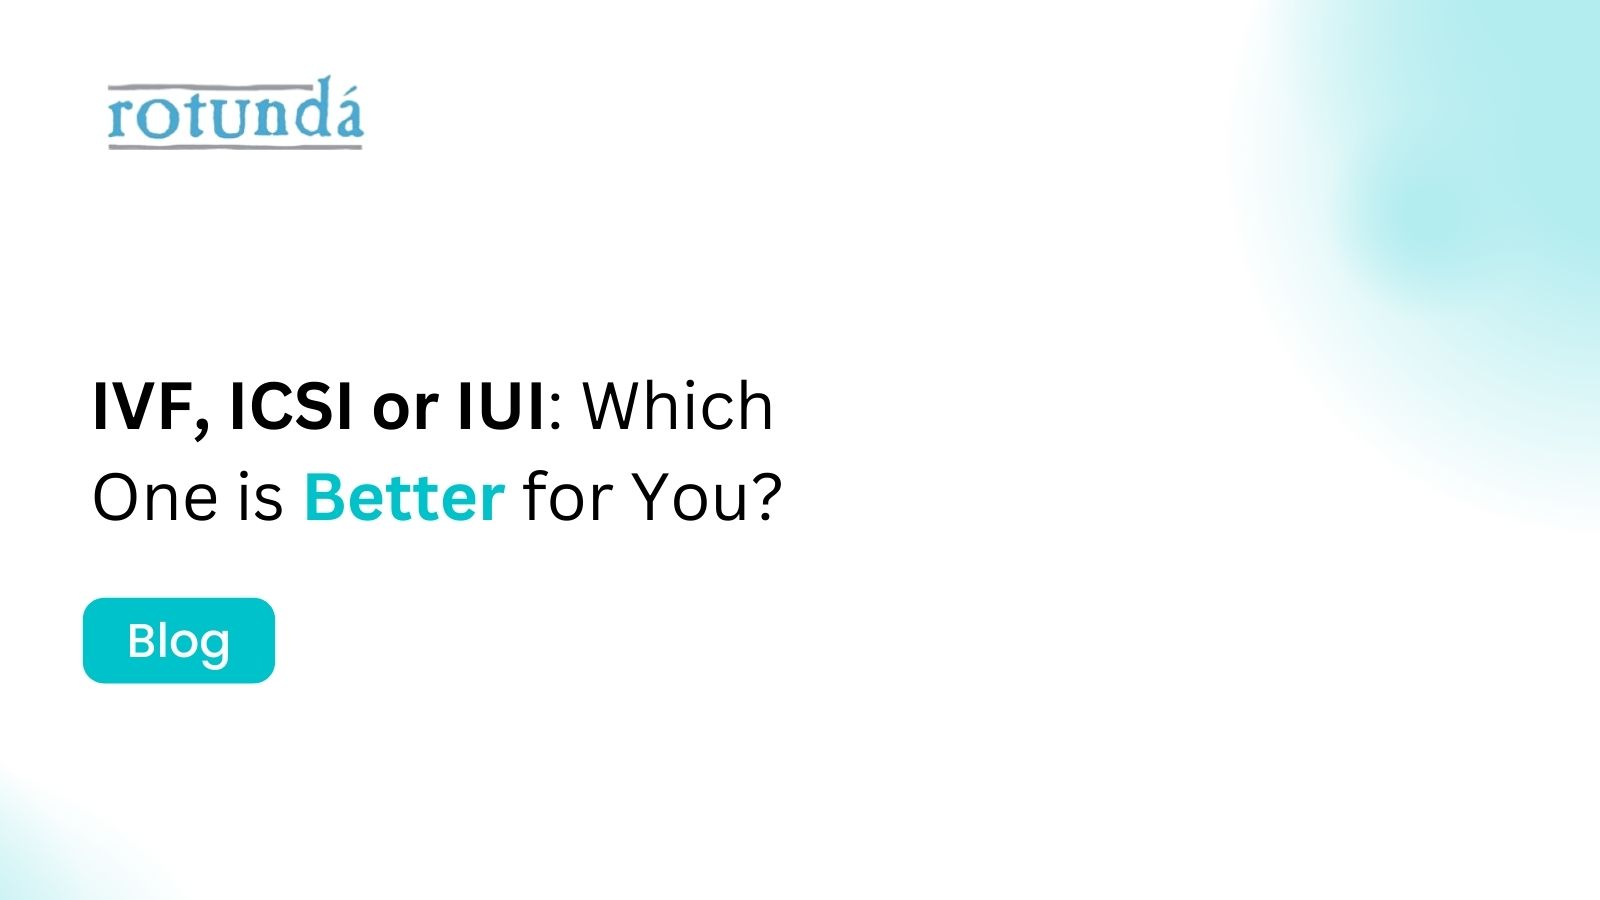 IVF, ICSI or IUI: Which One is Better for You?